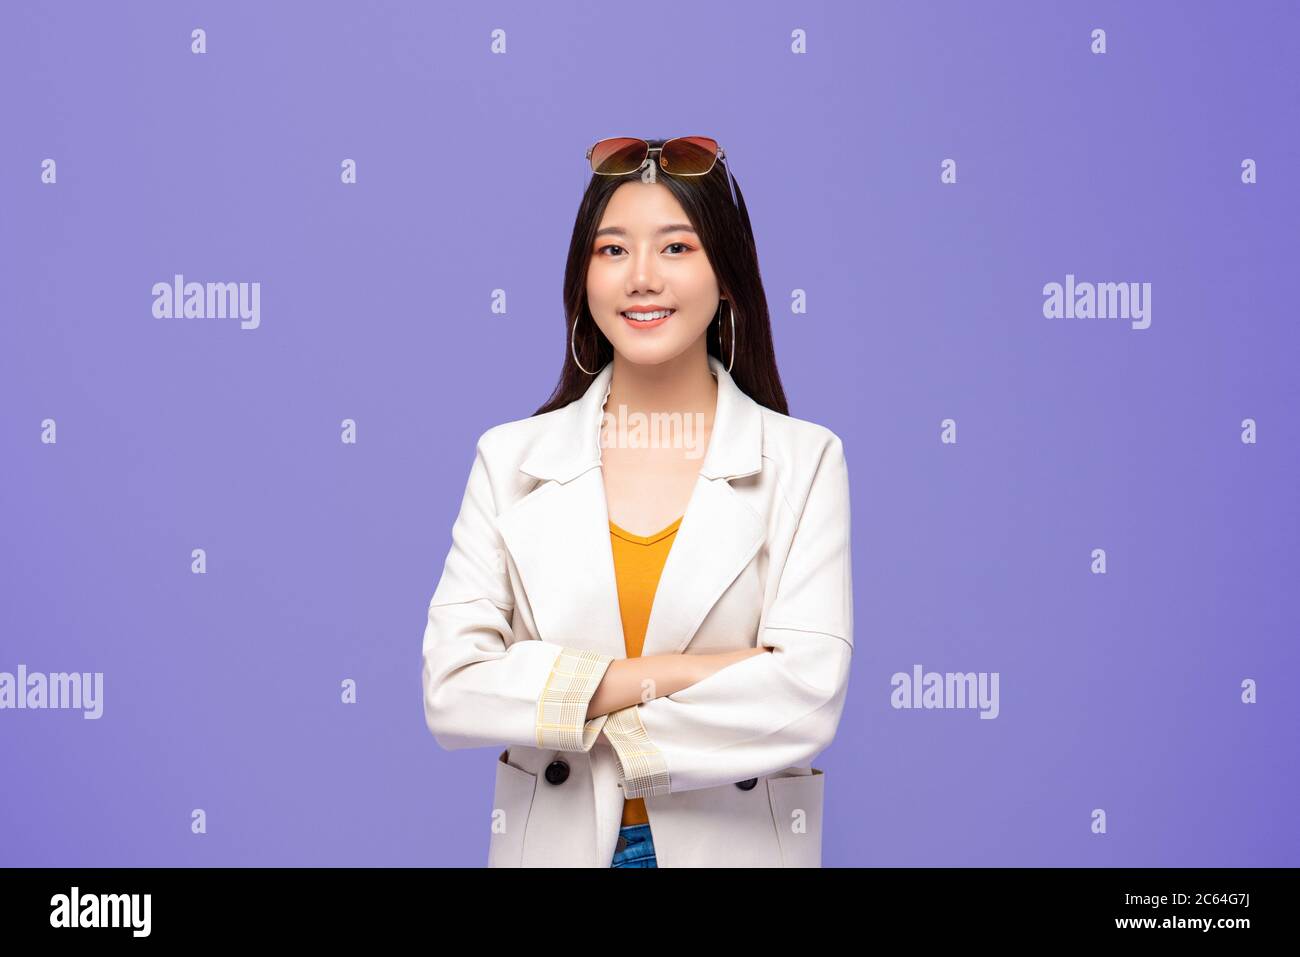 Portrait of young pretty smiling Asian woman in smart casual clothes crossing arms on colorful purple background Stock Photo